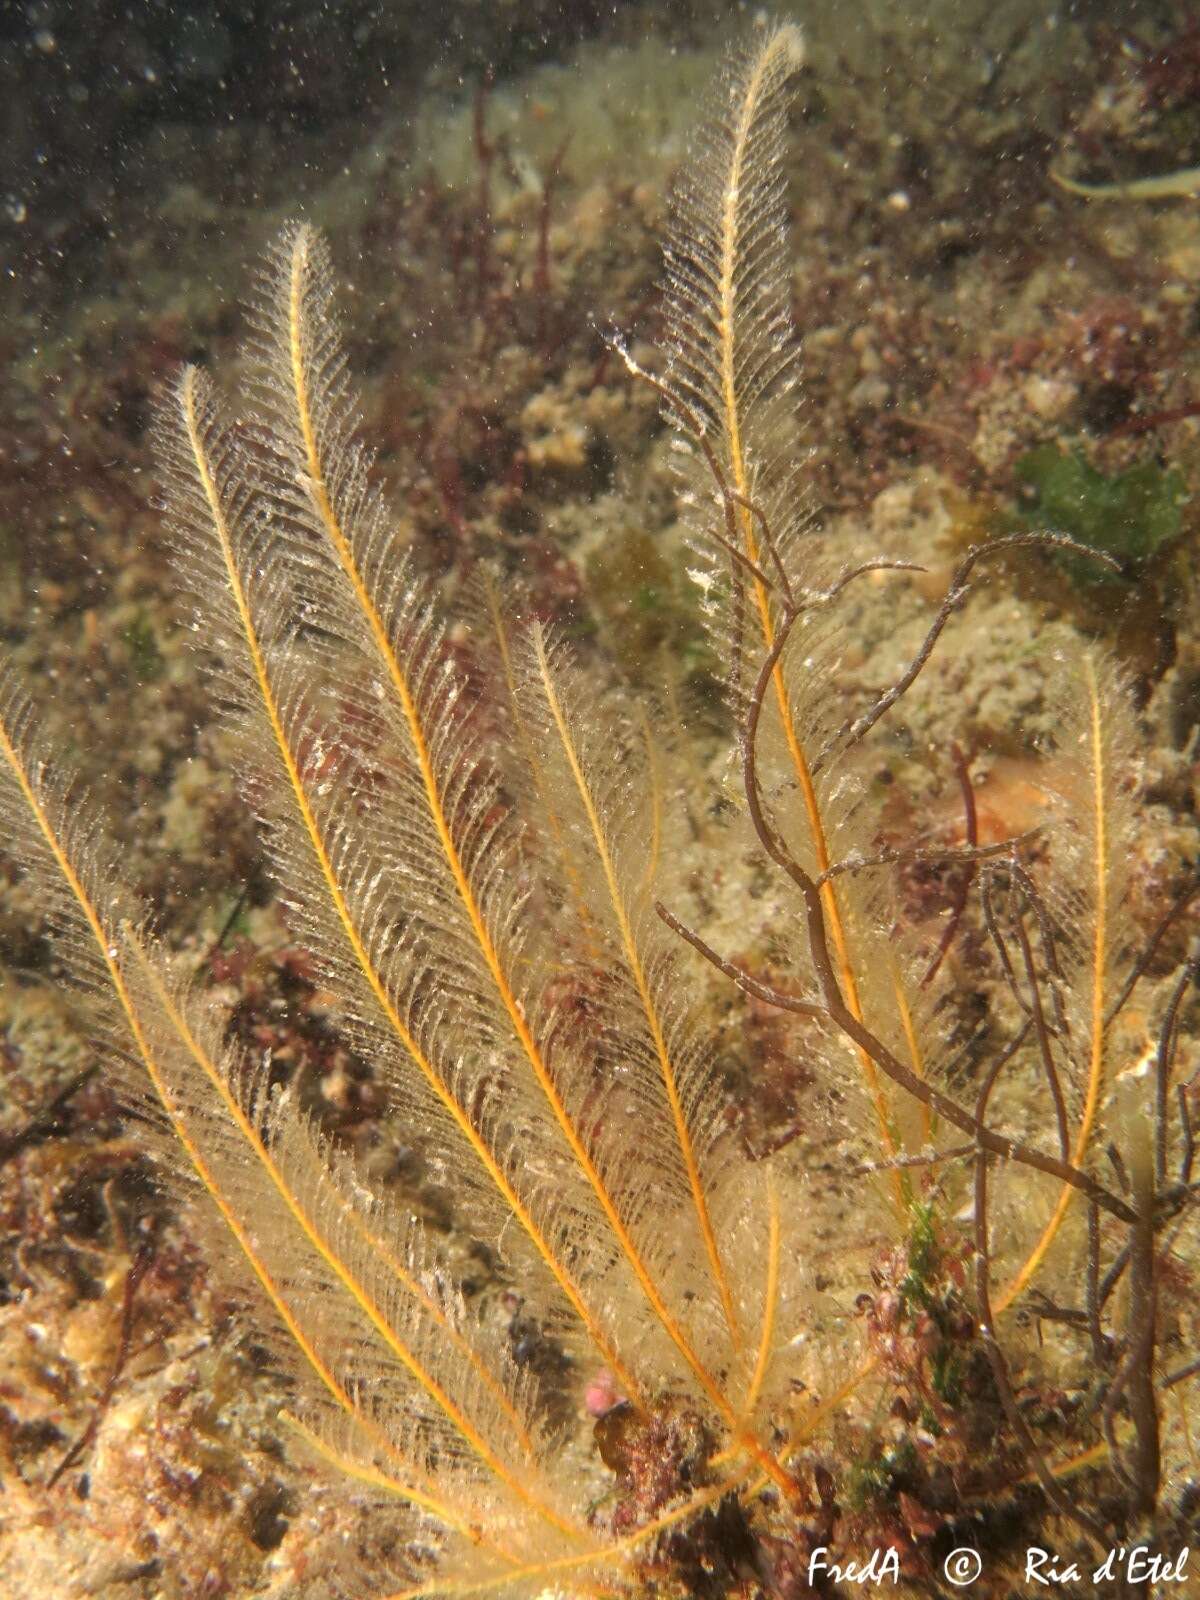 Image of antenna hydroid